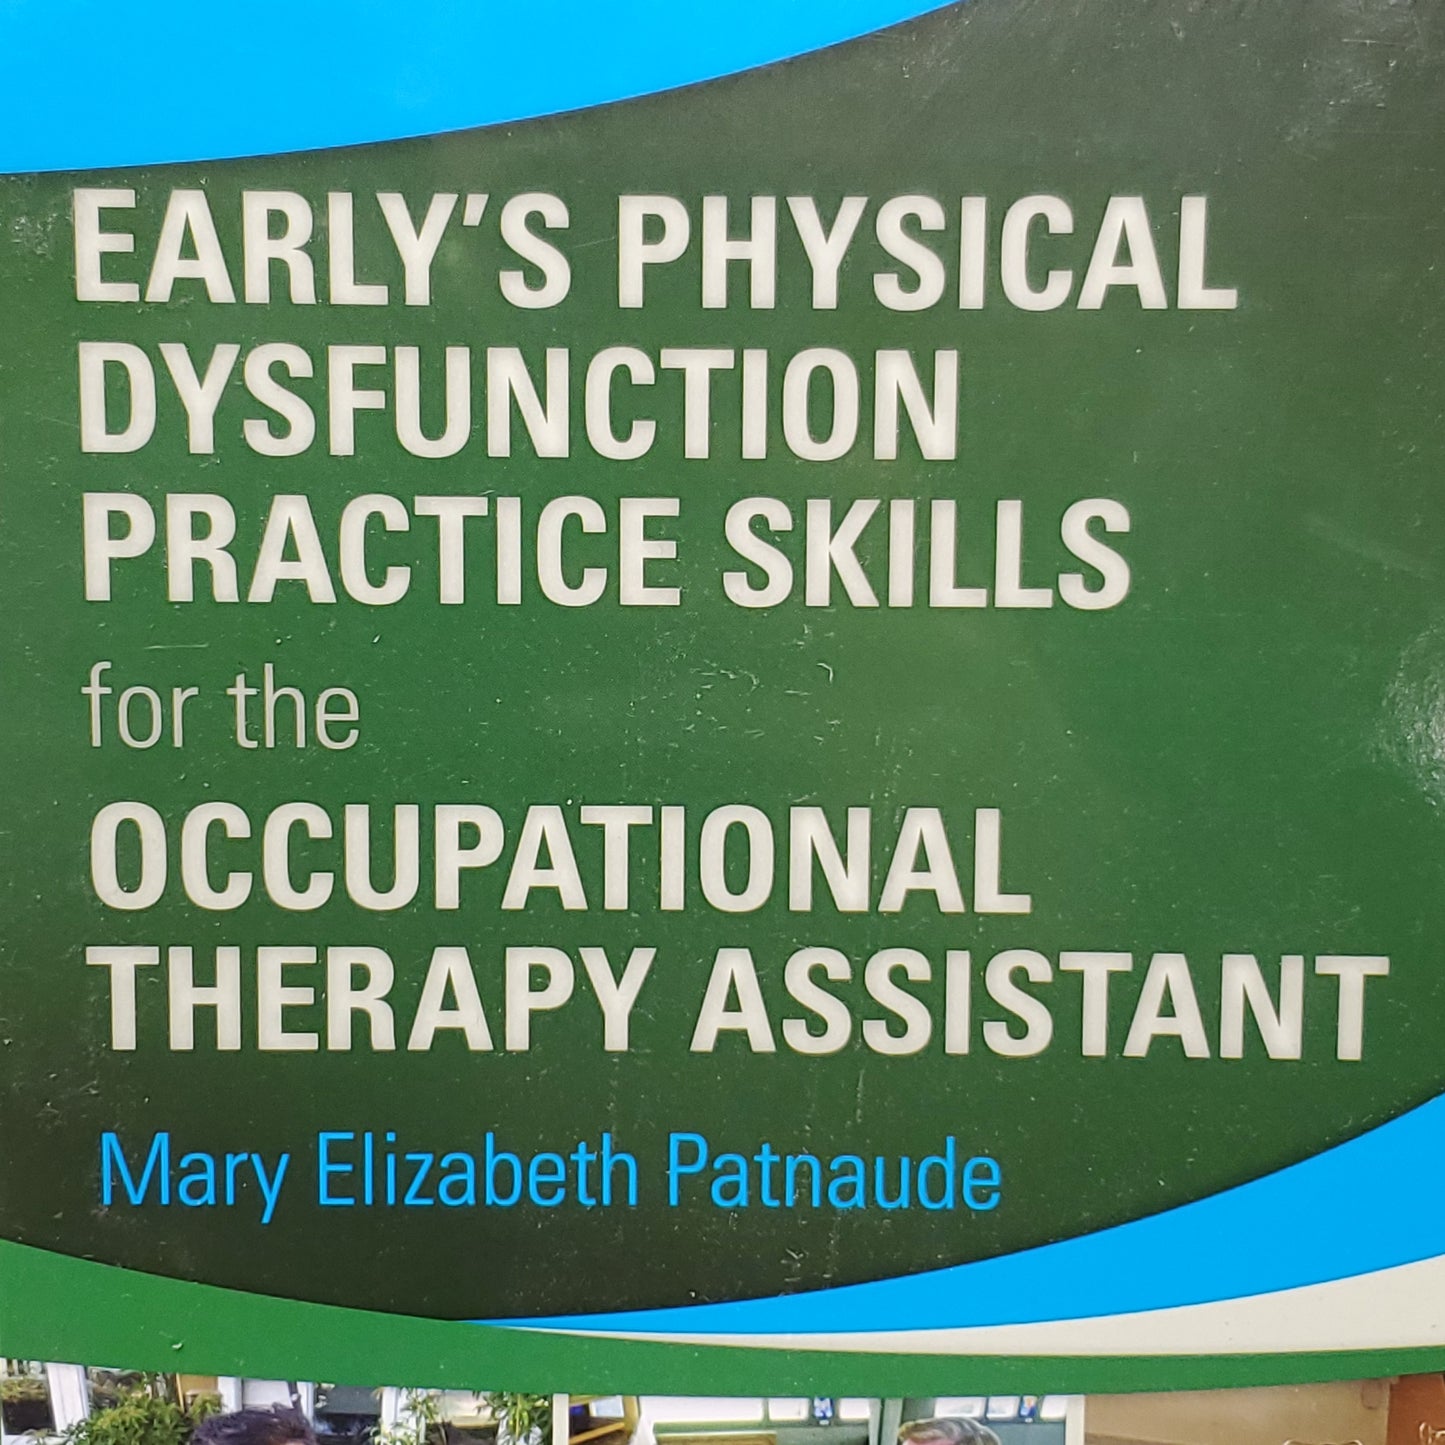 ELSEVIER Occupational Therapy Assistant Textbook Fourth Edition Mary Patnaude (New)